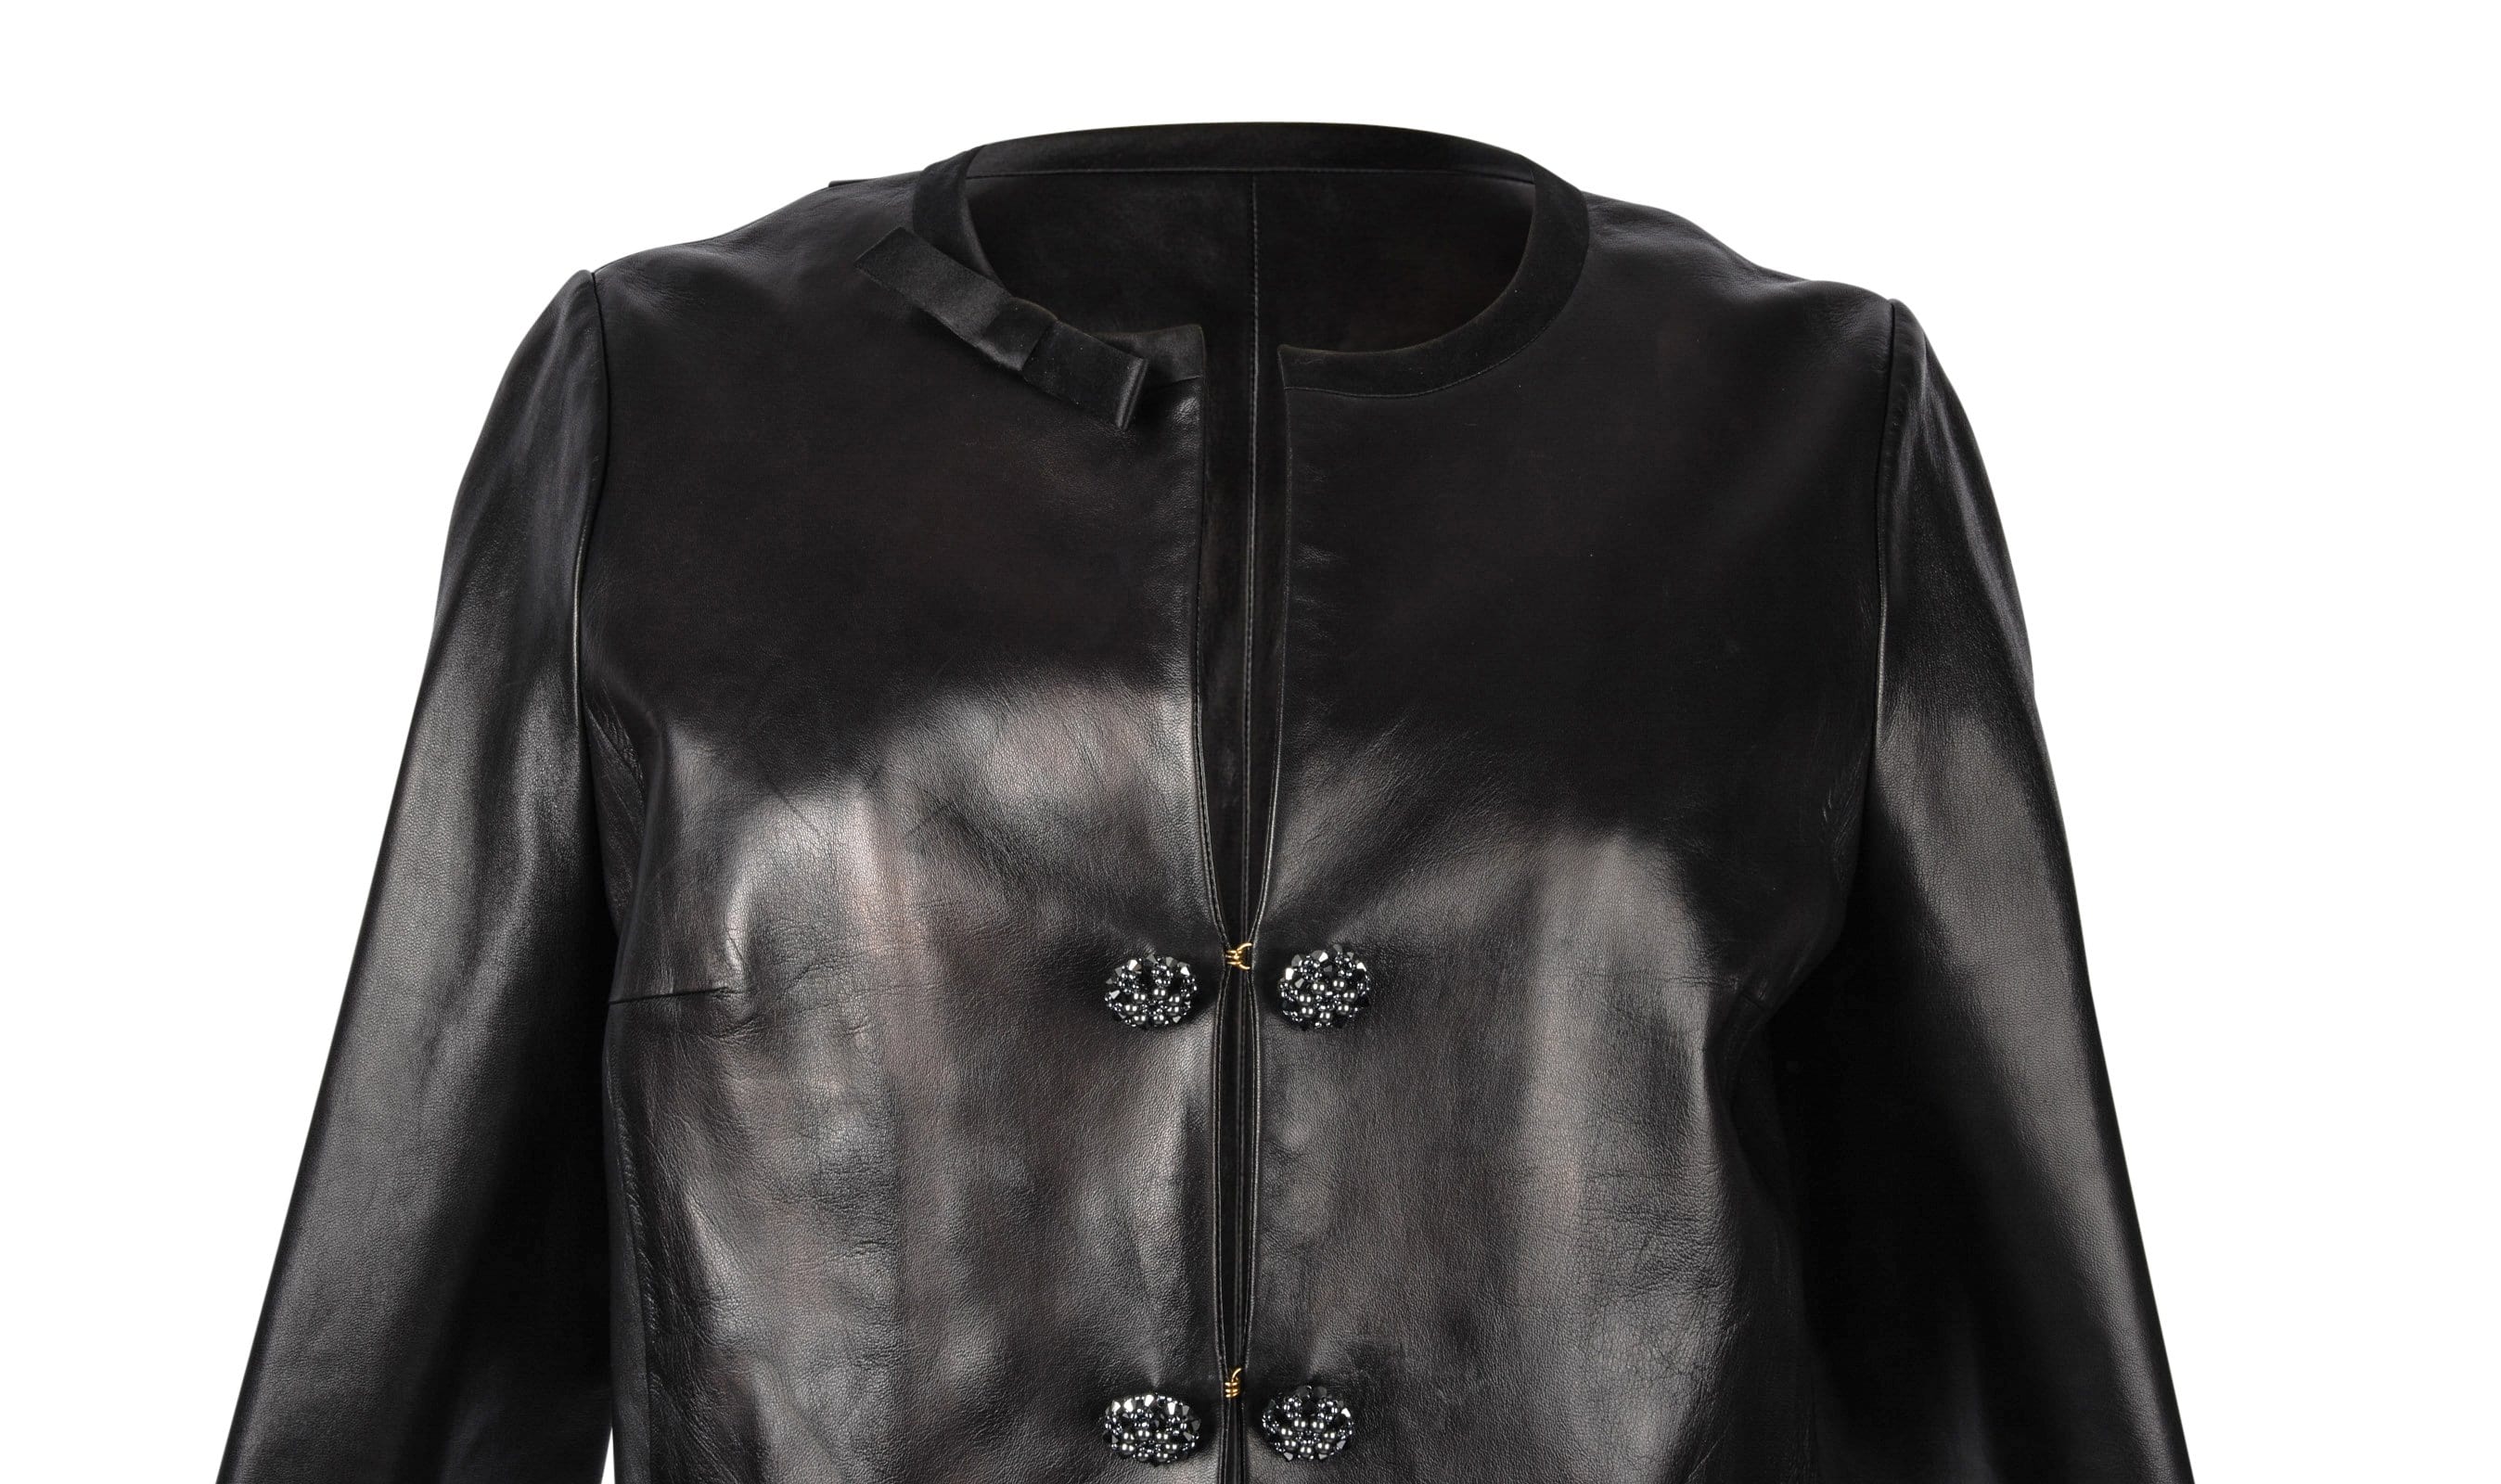 Louis Vuitton Jacket Black Leather Jeweled Buttons Floral Lining